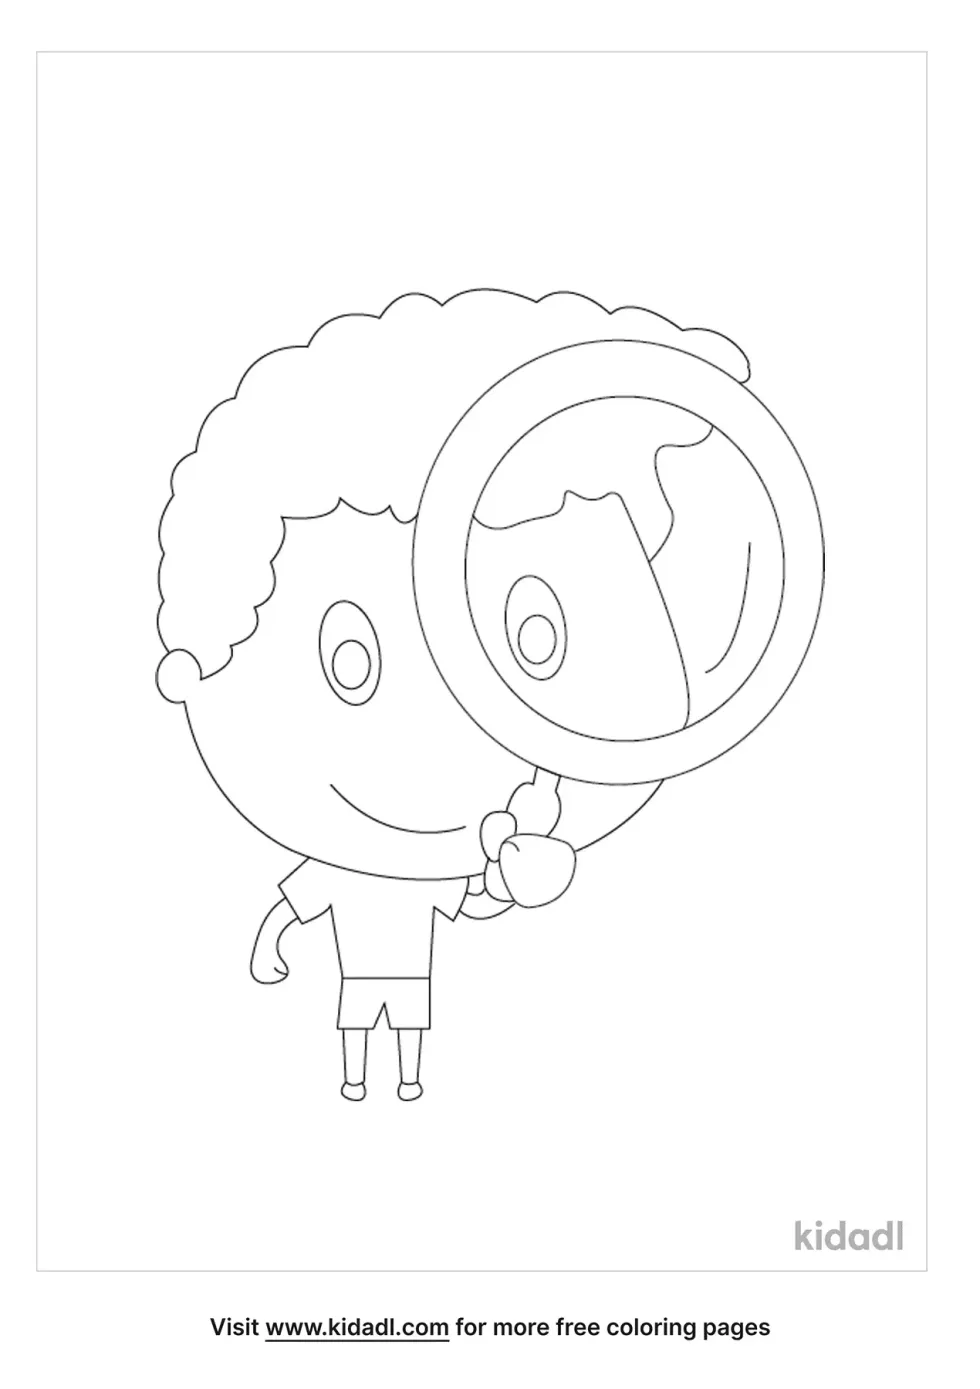 Boy Using A Magnifier Coloring Page